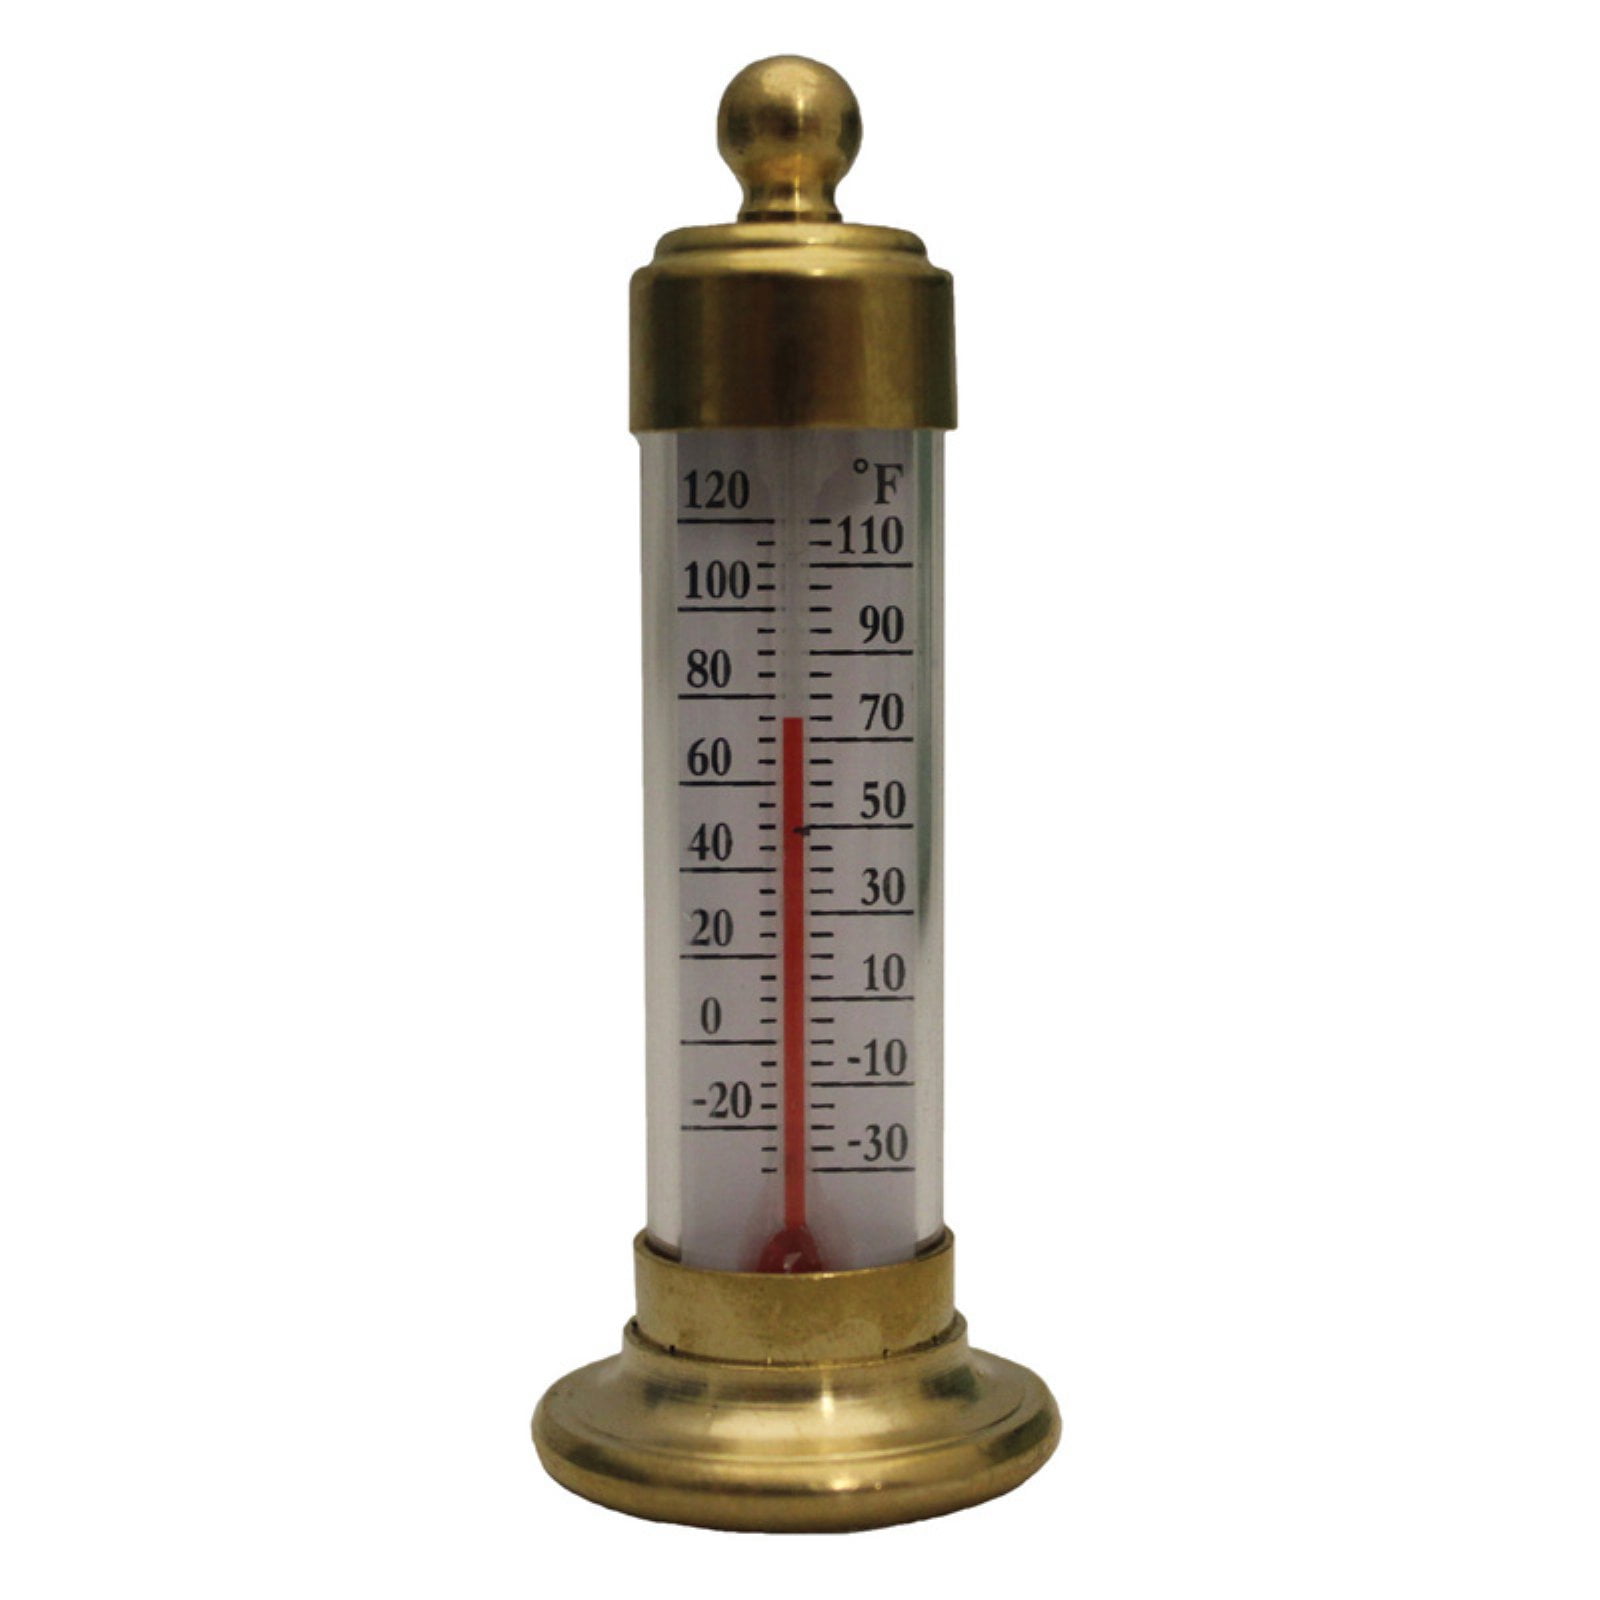 SALE - Vermont Brass 4 Dial Outdoor Thermometer by Conant T6LFB - $54.95 -  Fine Weather Instruments - The Weather Store